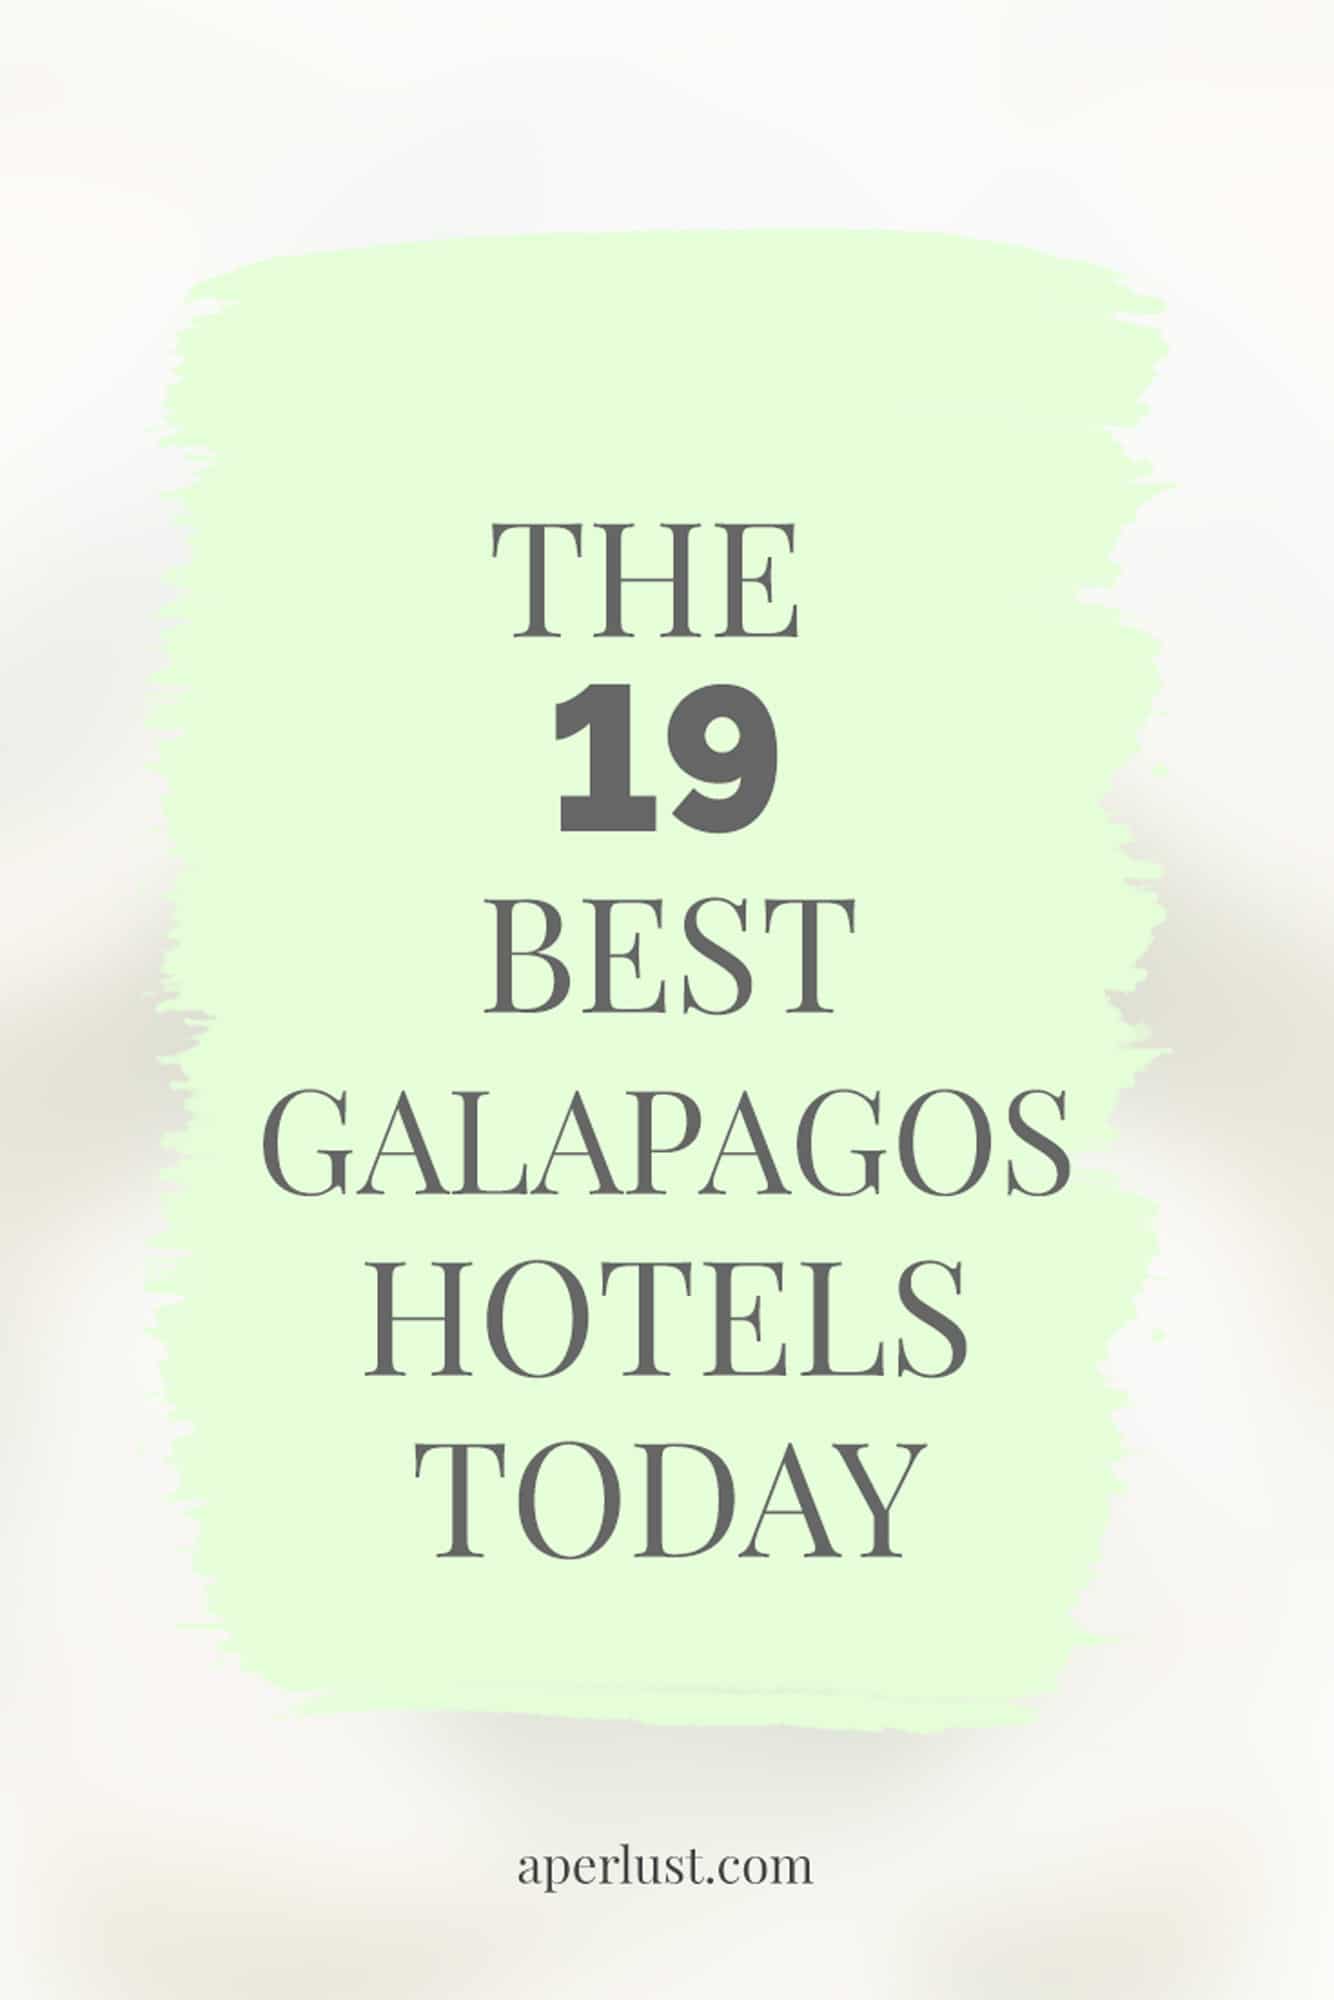 The 19 best Galapagos hotels today Pinterest Pin